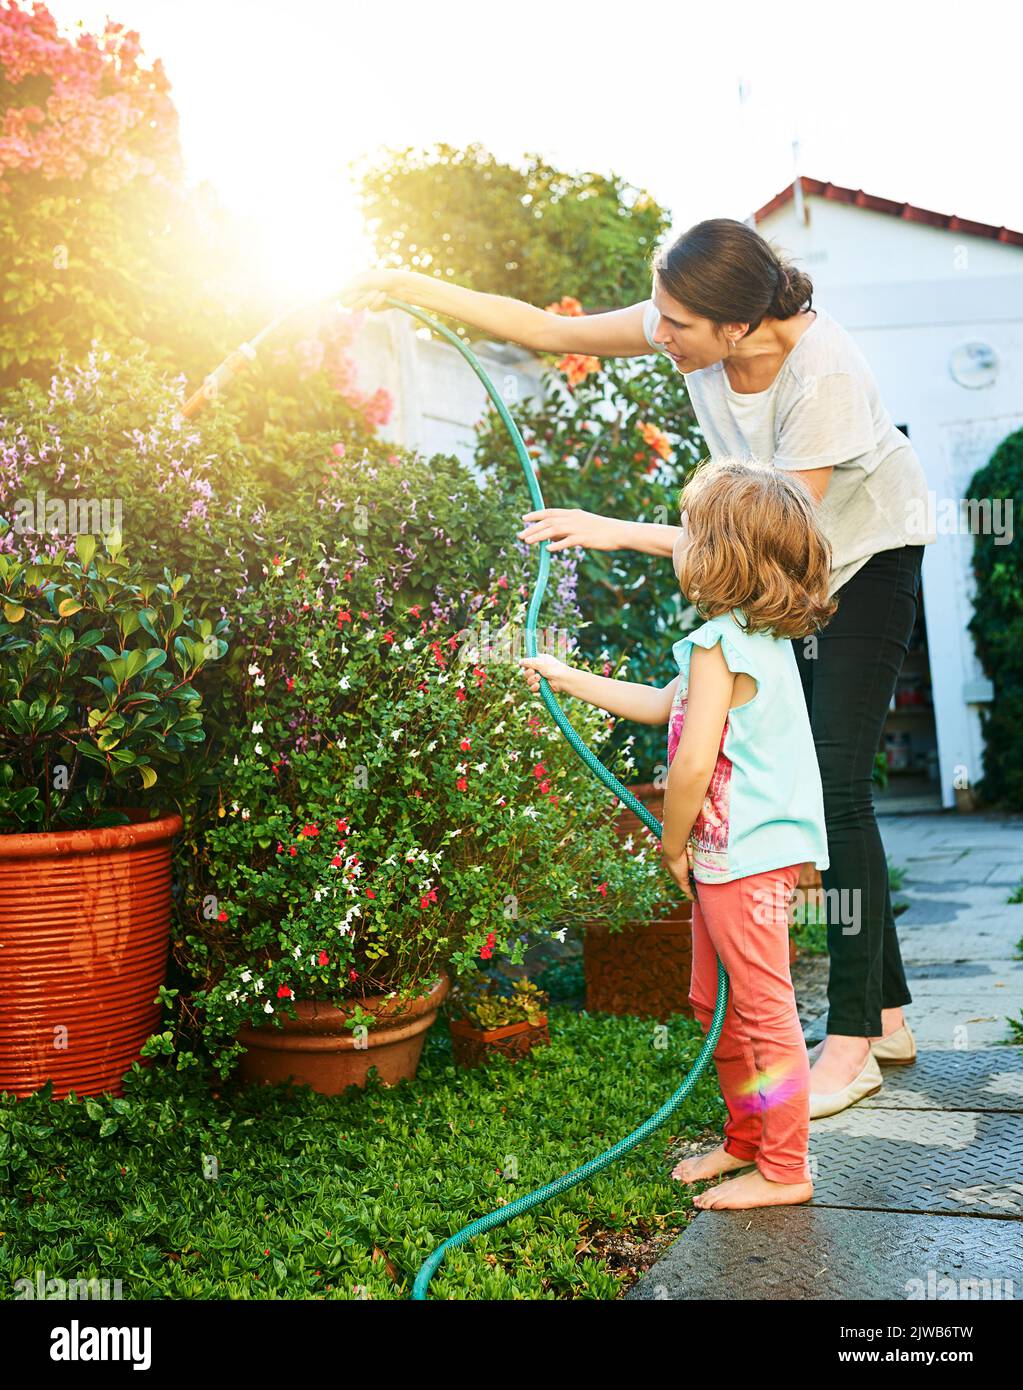 Taking care of the garden is her job now. a mother and daughter doing chores together at home. Stock Photo